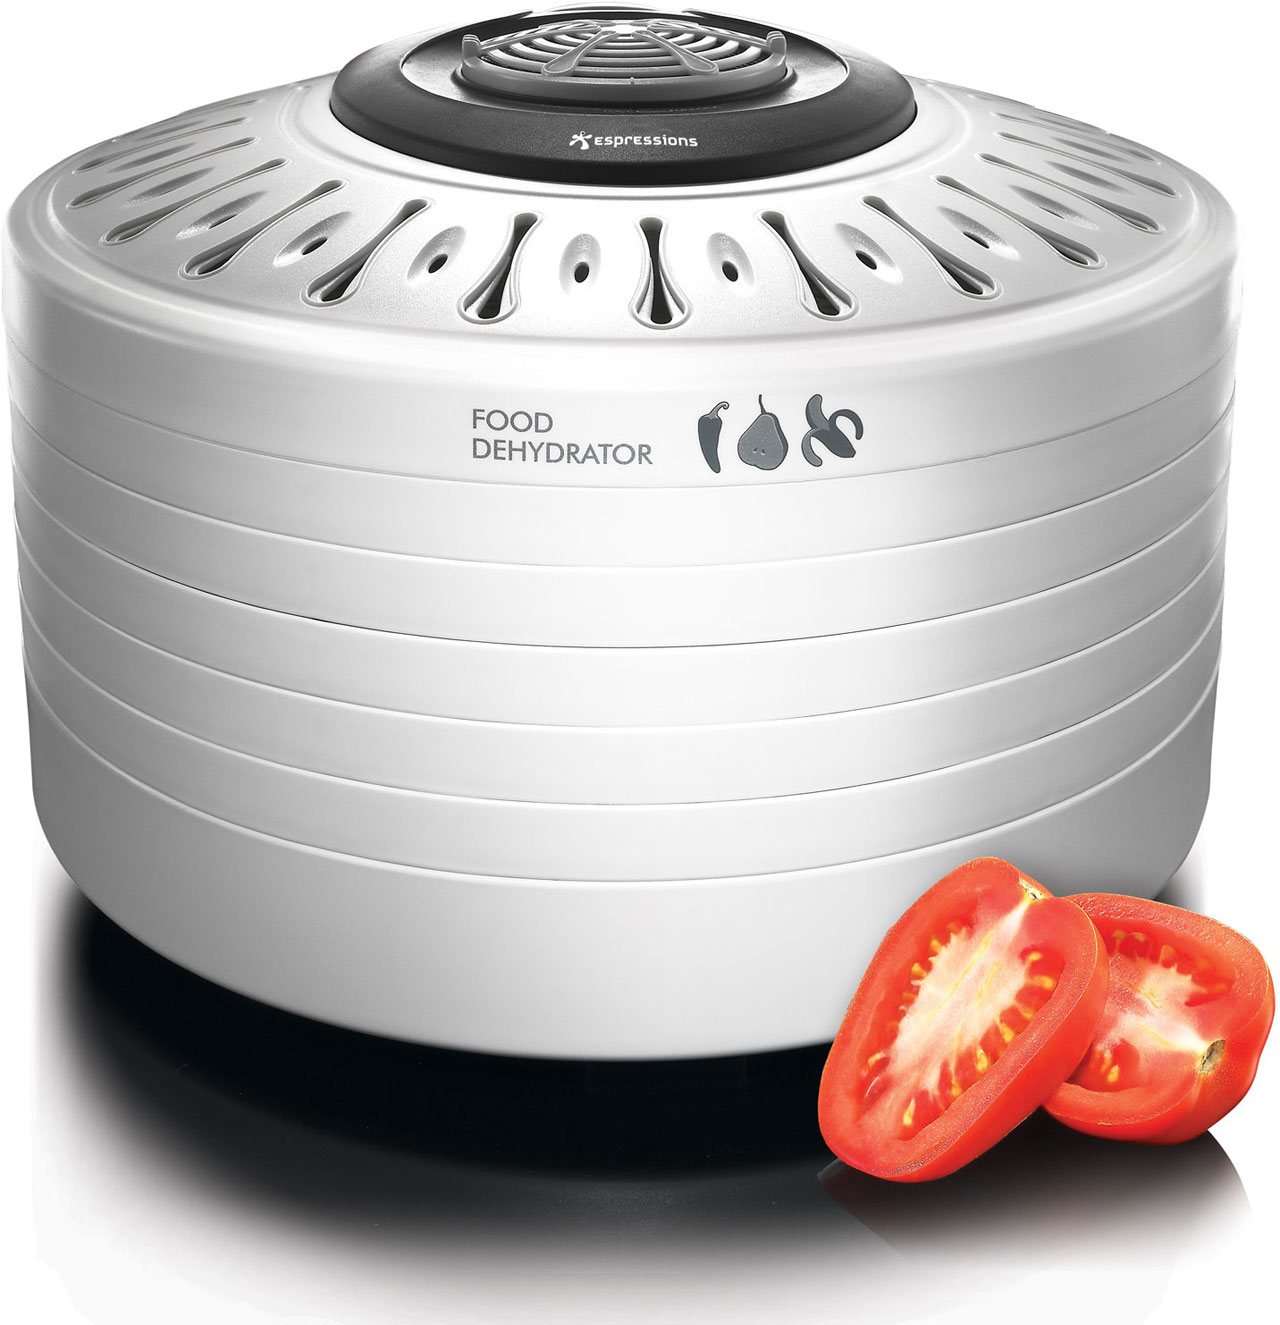 https://www.kenners.nl/images/detailed/8/EP5600-002-Dehydrator-725kb.jpg